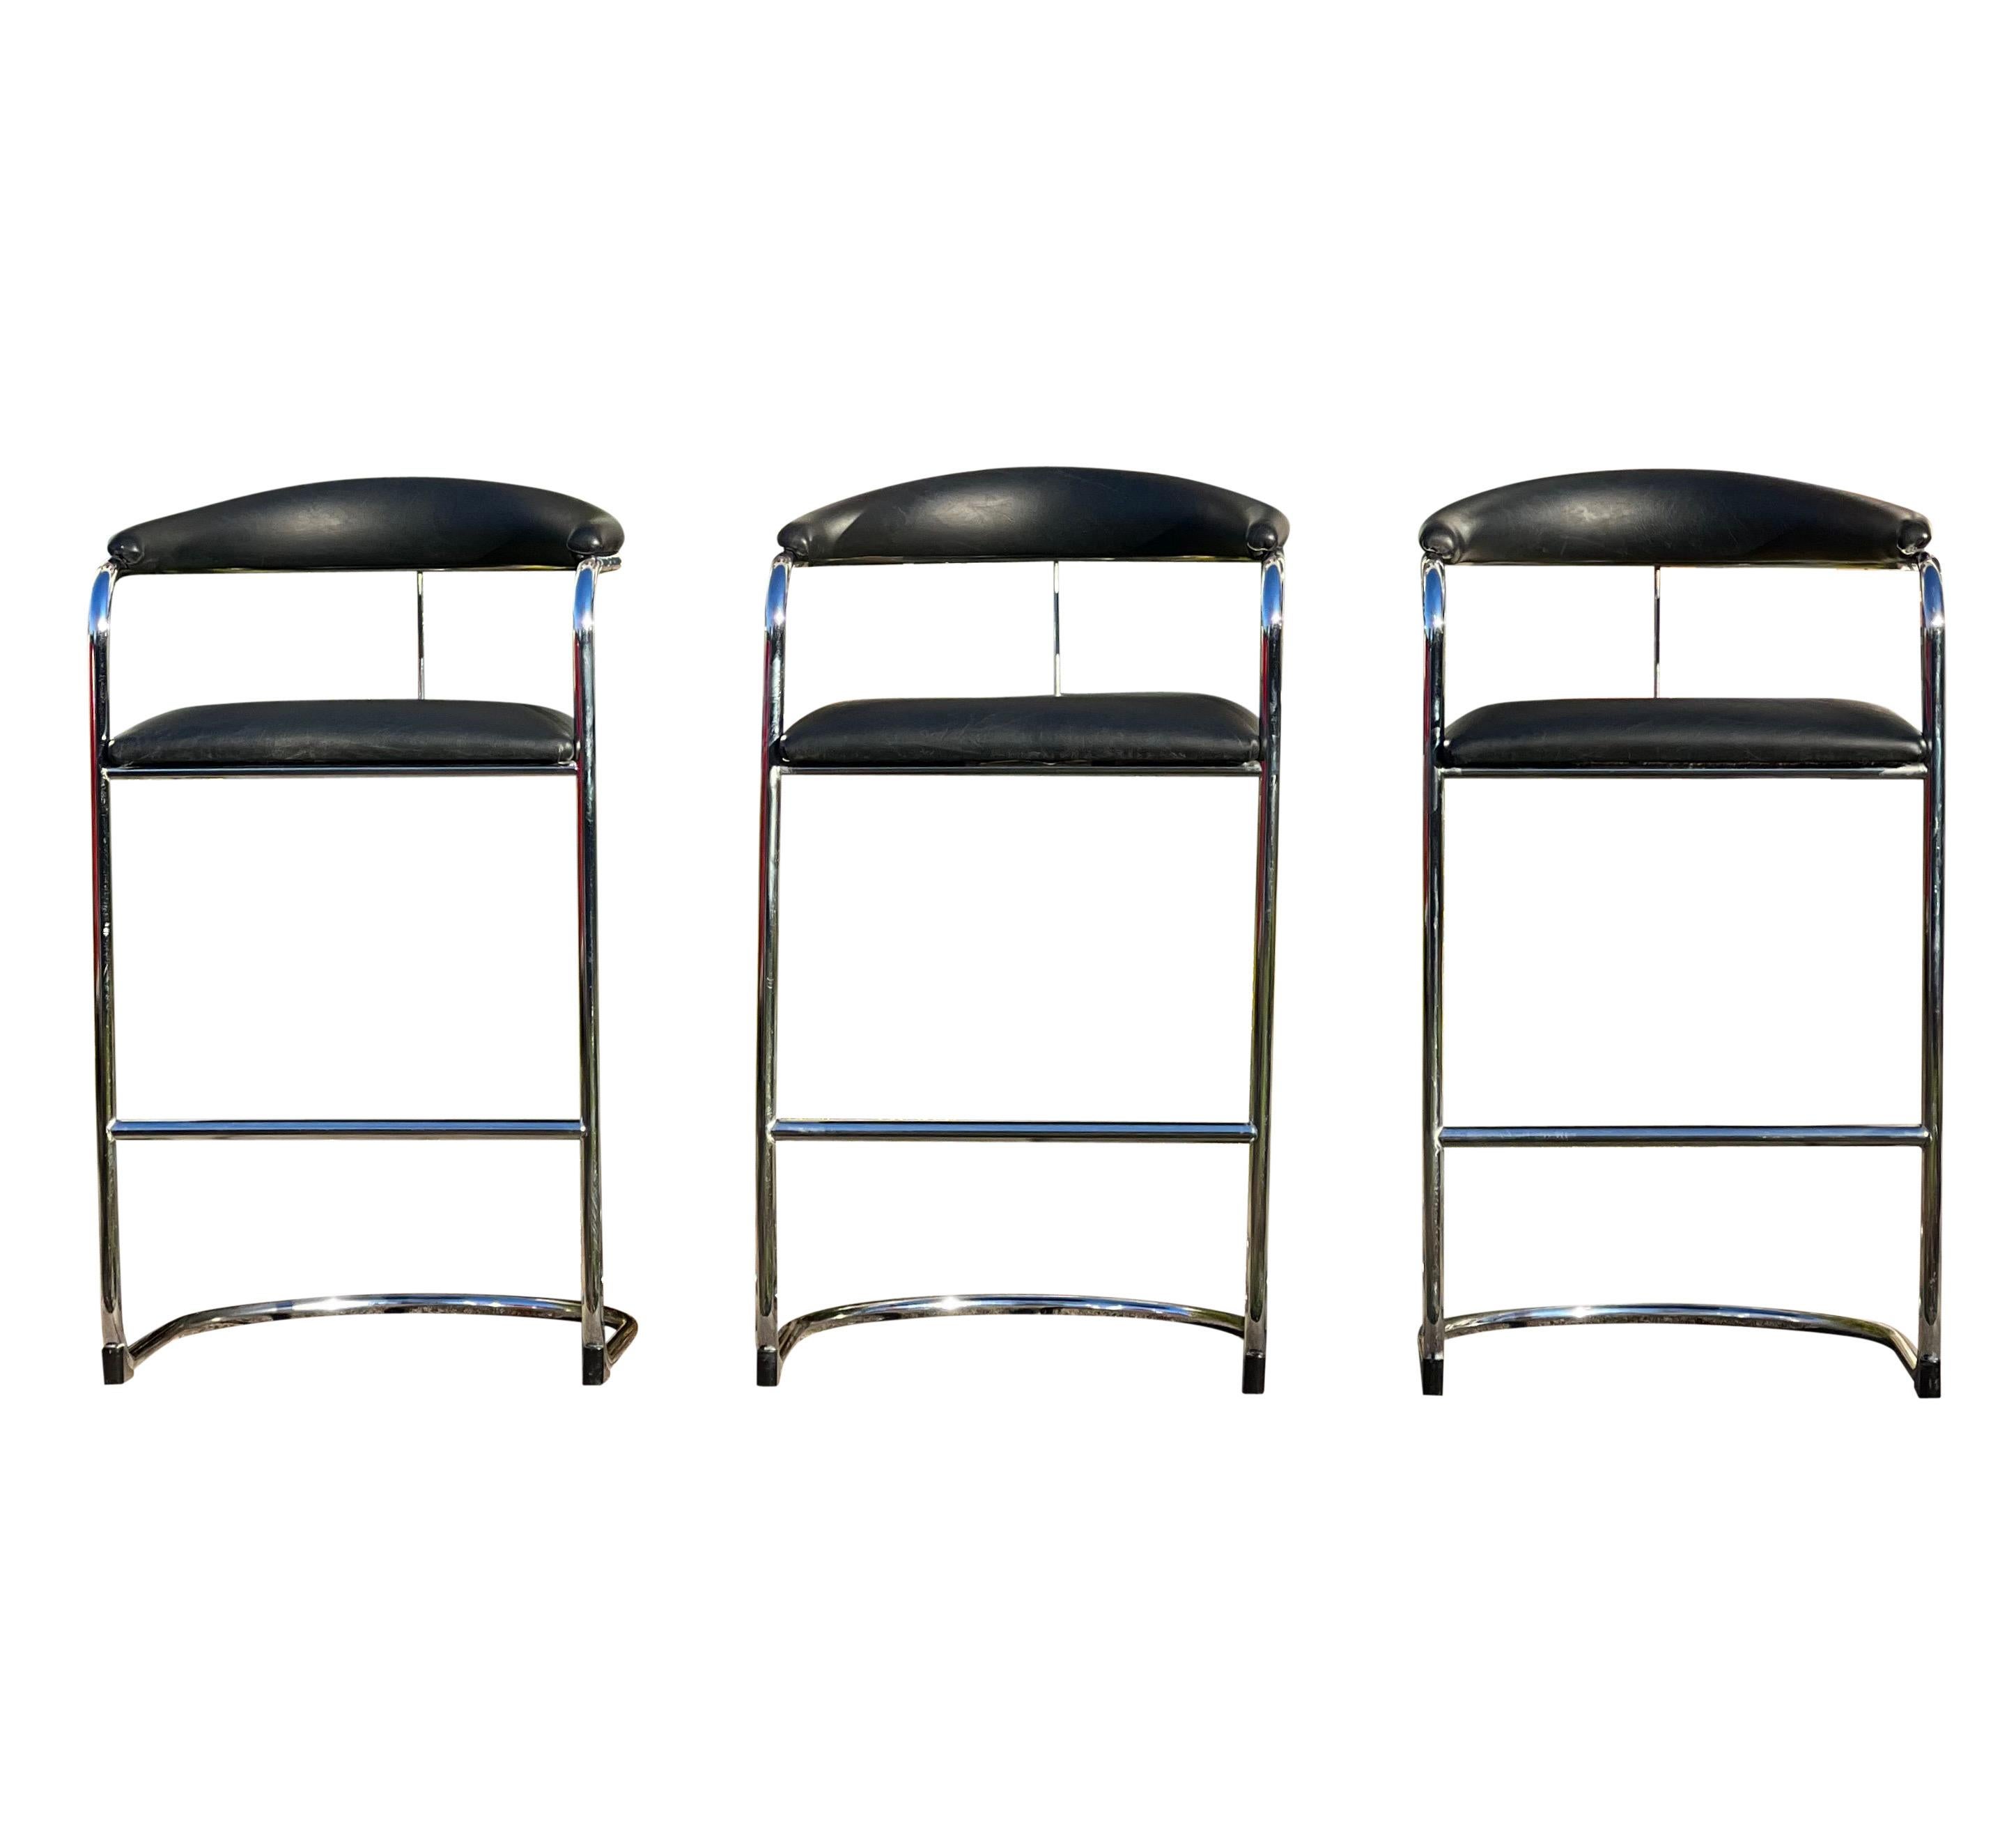 Later edition cantilever chrome bar stools designed by Anton Lorenz for Thonet in 1929.  Stools feature black faux leather upholstered seat and backrest with chrome-plated tubular steel frame and black stabilizers. All three stools are in very good